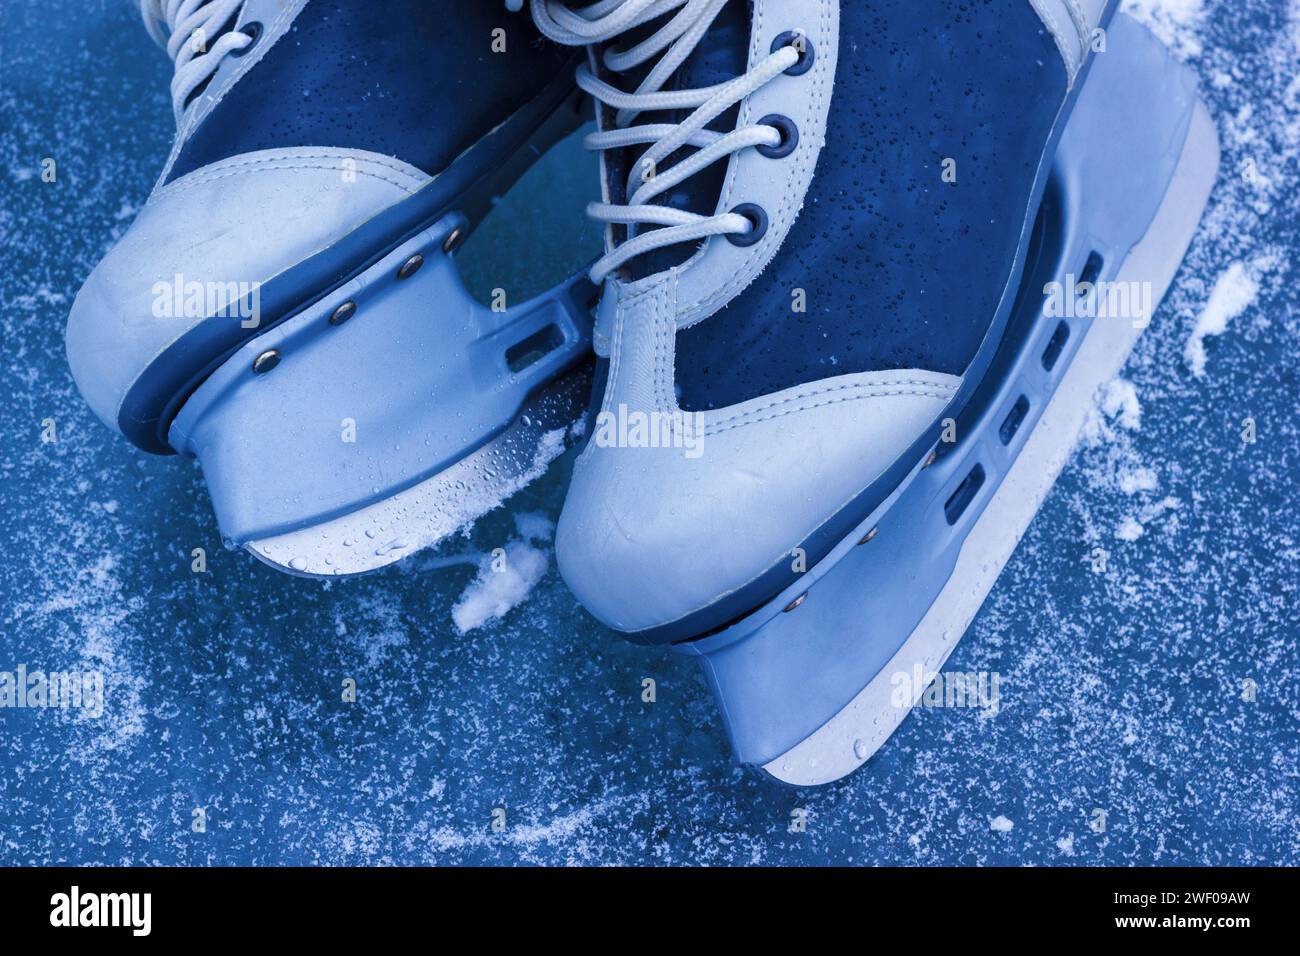 The Ice Skating Shoes For Winter Sport. Pair Of Ice Skates On Frozen Rink, Closeup View. Stock Photo